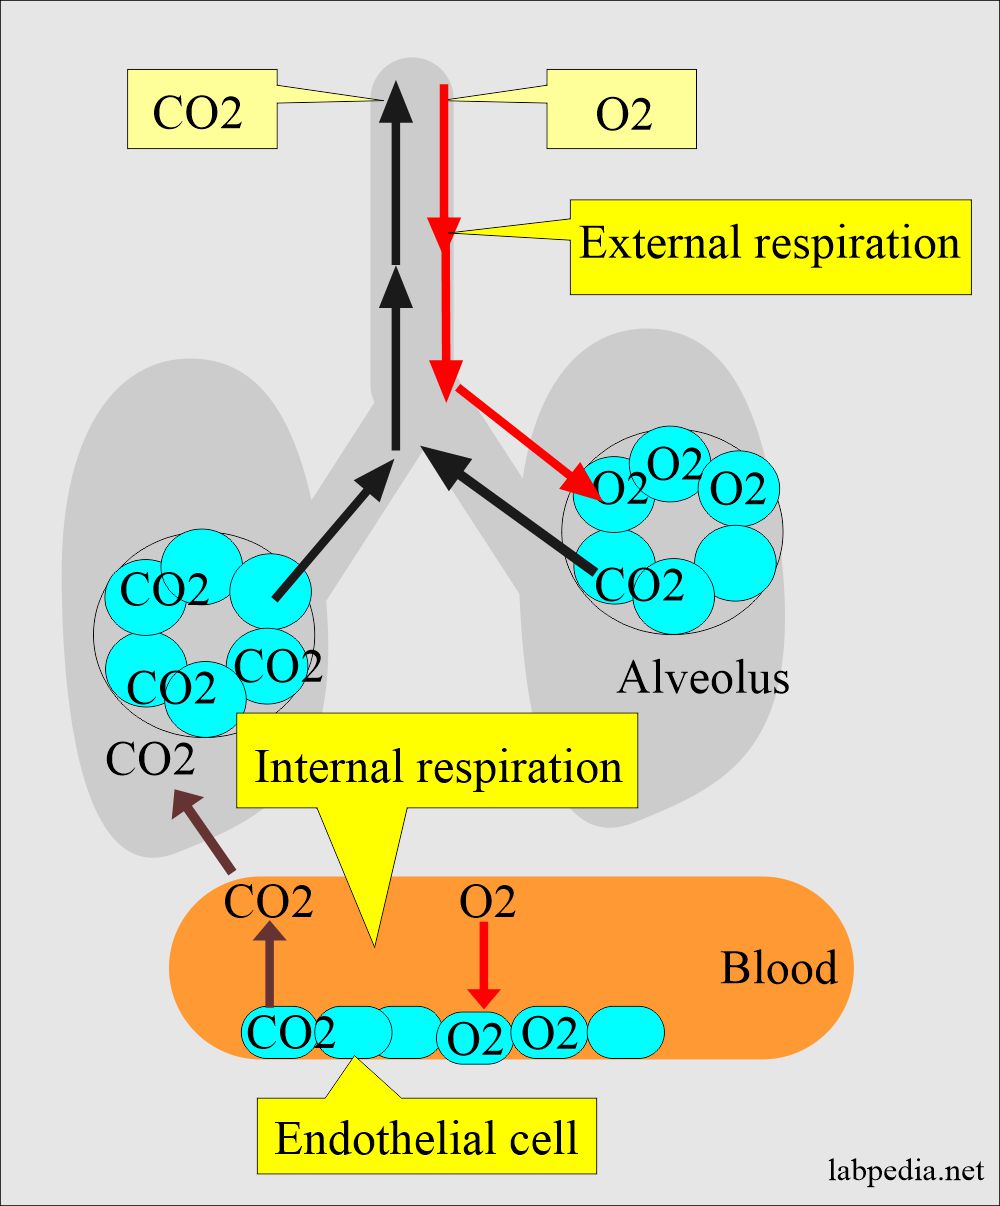 Role of the lungs in Acid-base balance